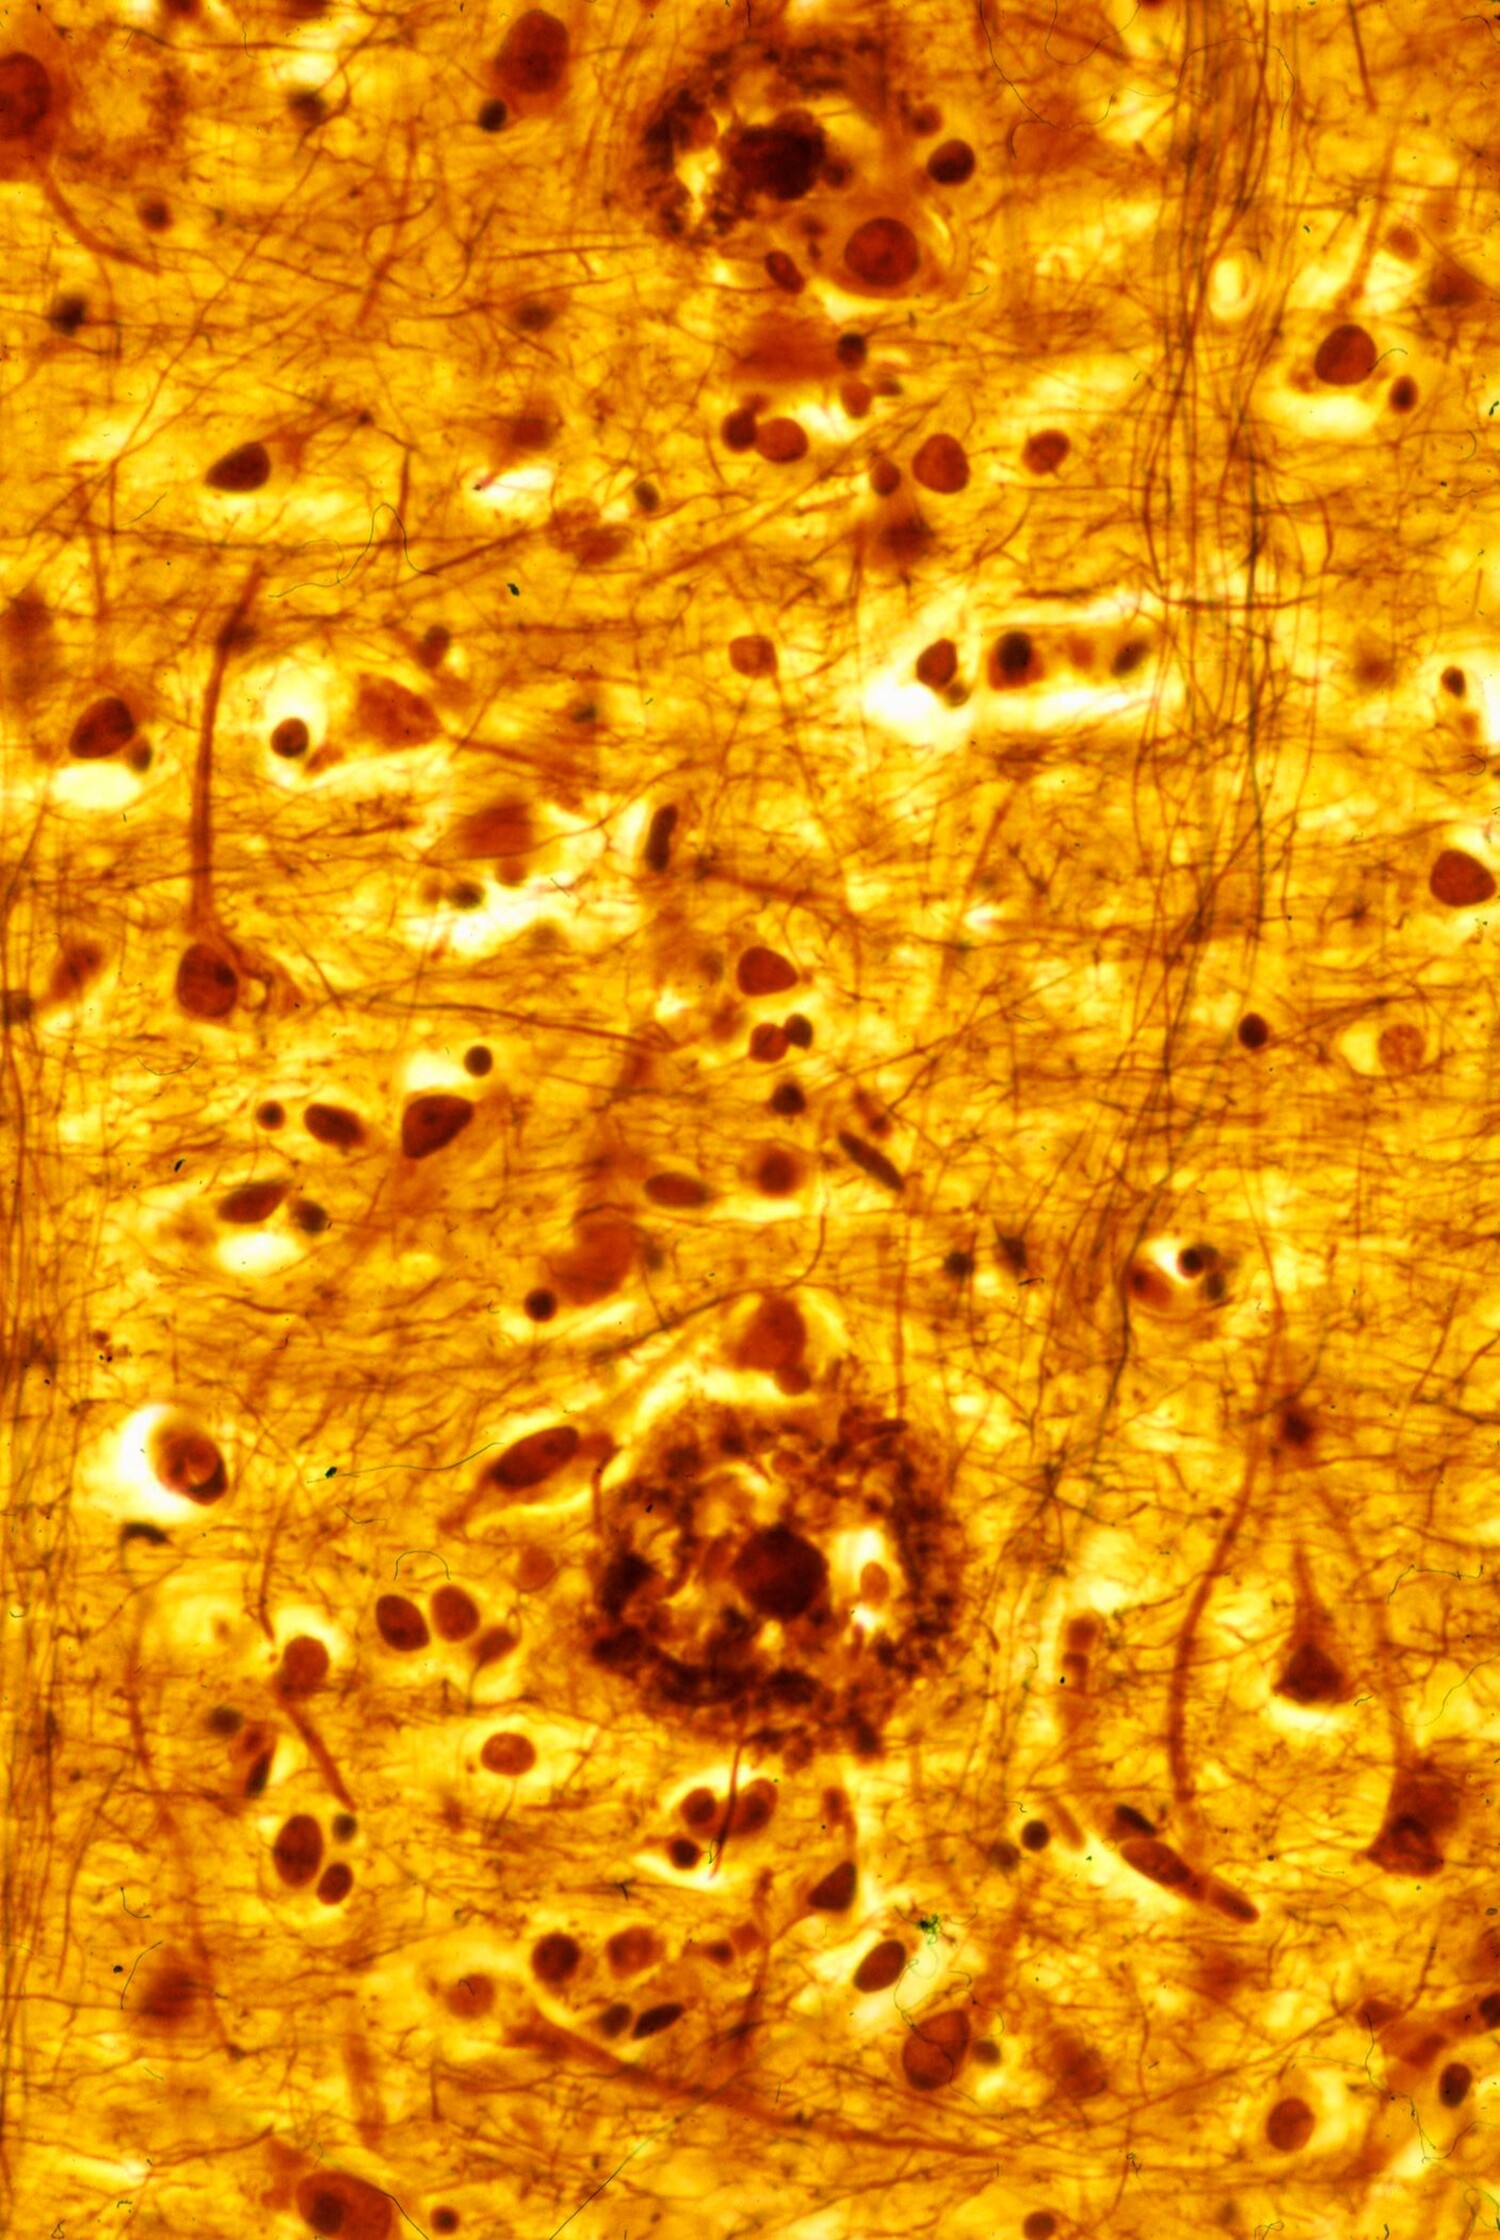 Microscopic scan of a person&apos;s cerebral cortex, stained in gold, shows the accumulation of plaques that can contribute to dementia symptoms